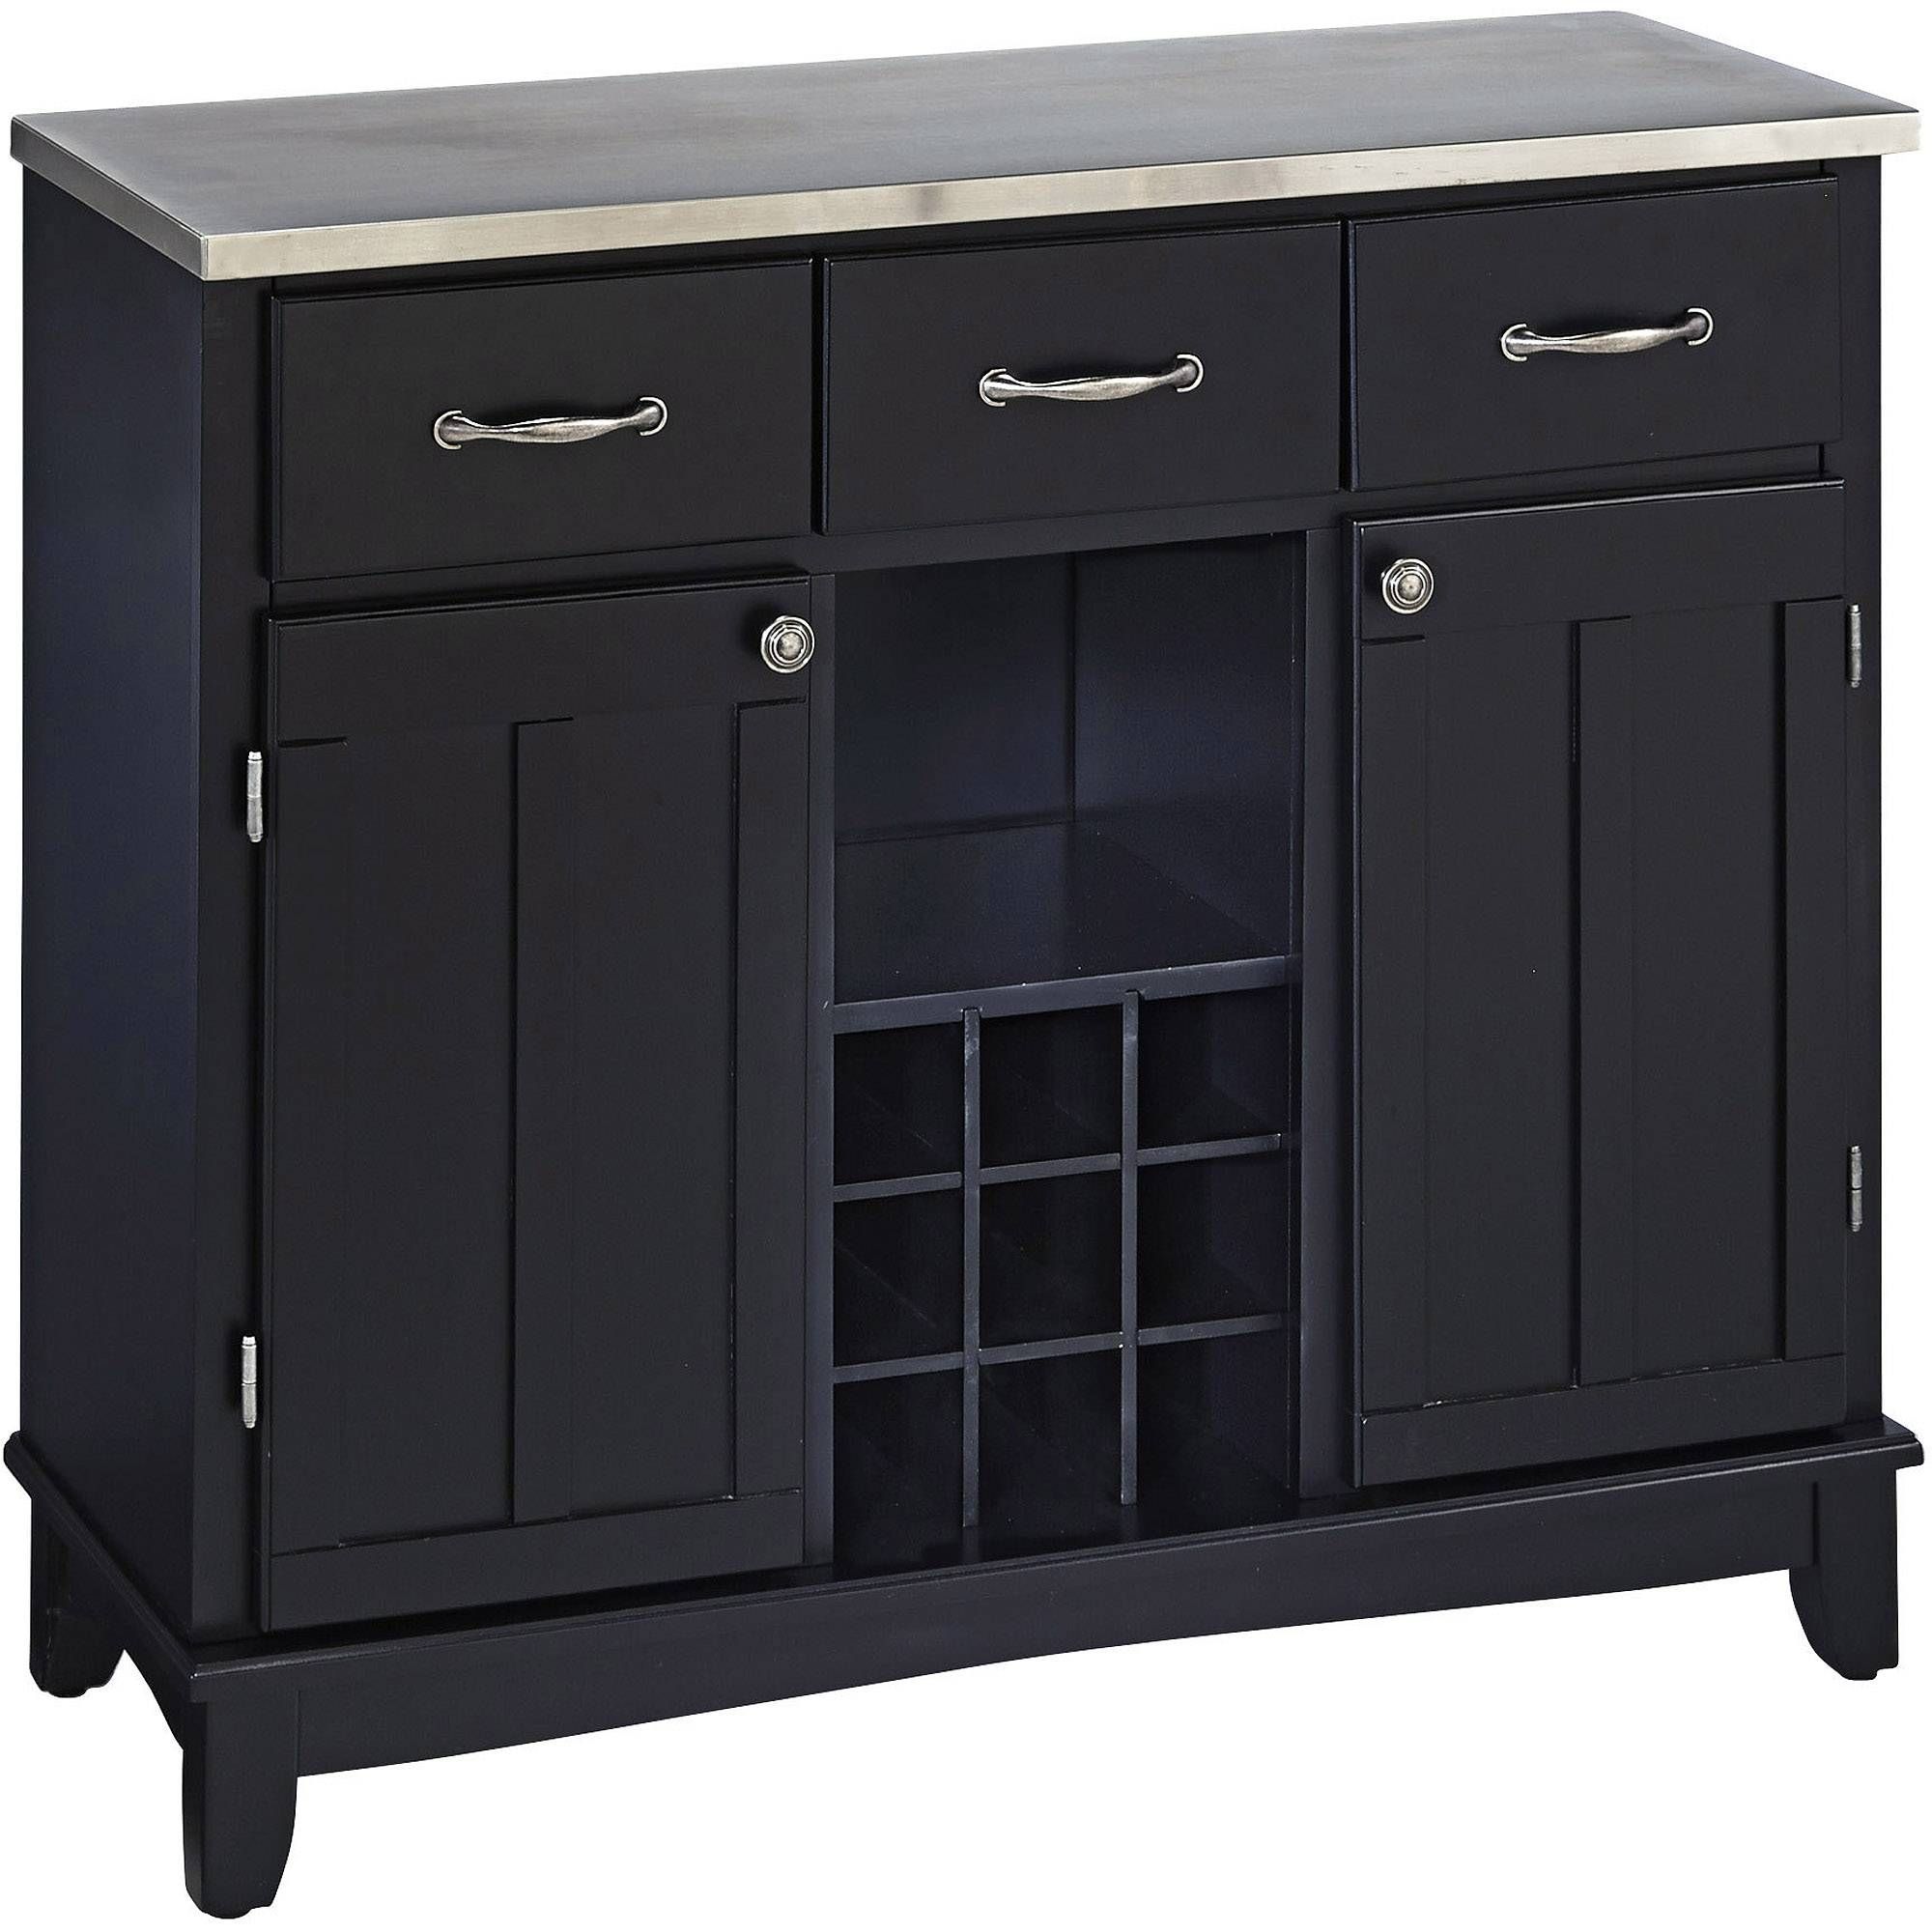 China Cabinet & Buffet Furniture : Kitchen & Dining Furniture Pertaining To Small Black Sideboard (View 11 of 20)